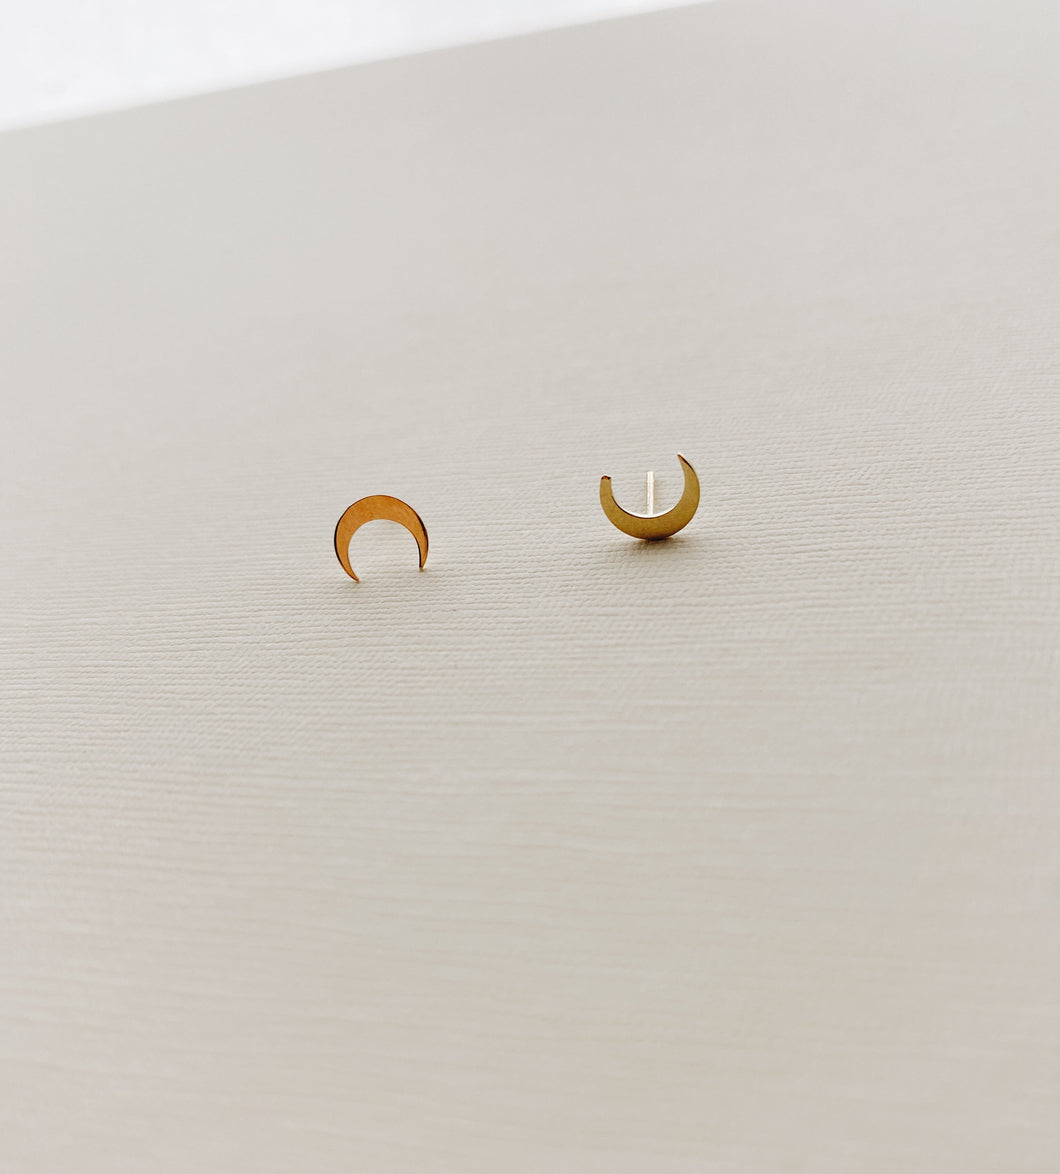 10K Solid gold/rose gold crescent moon stud earrings